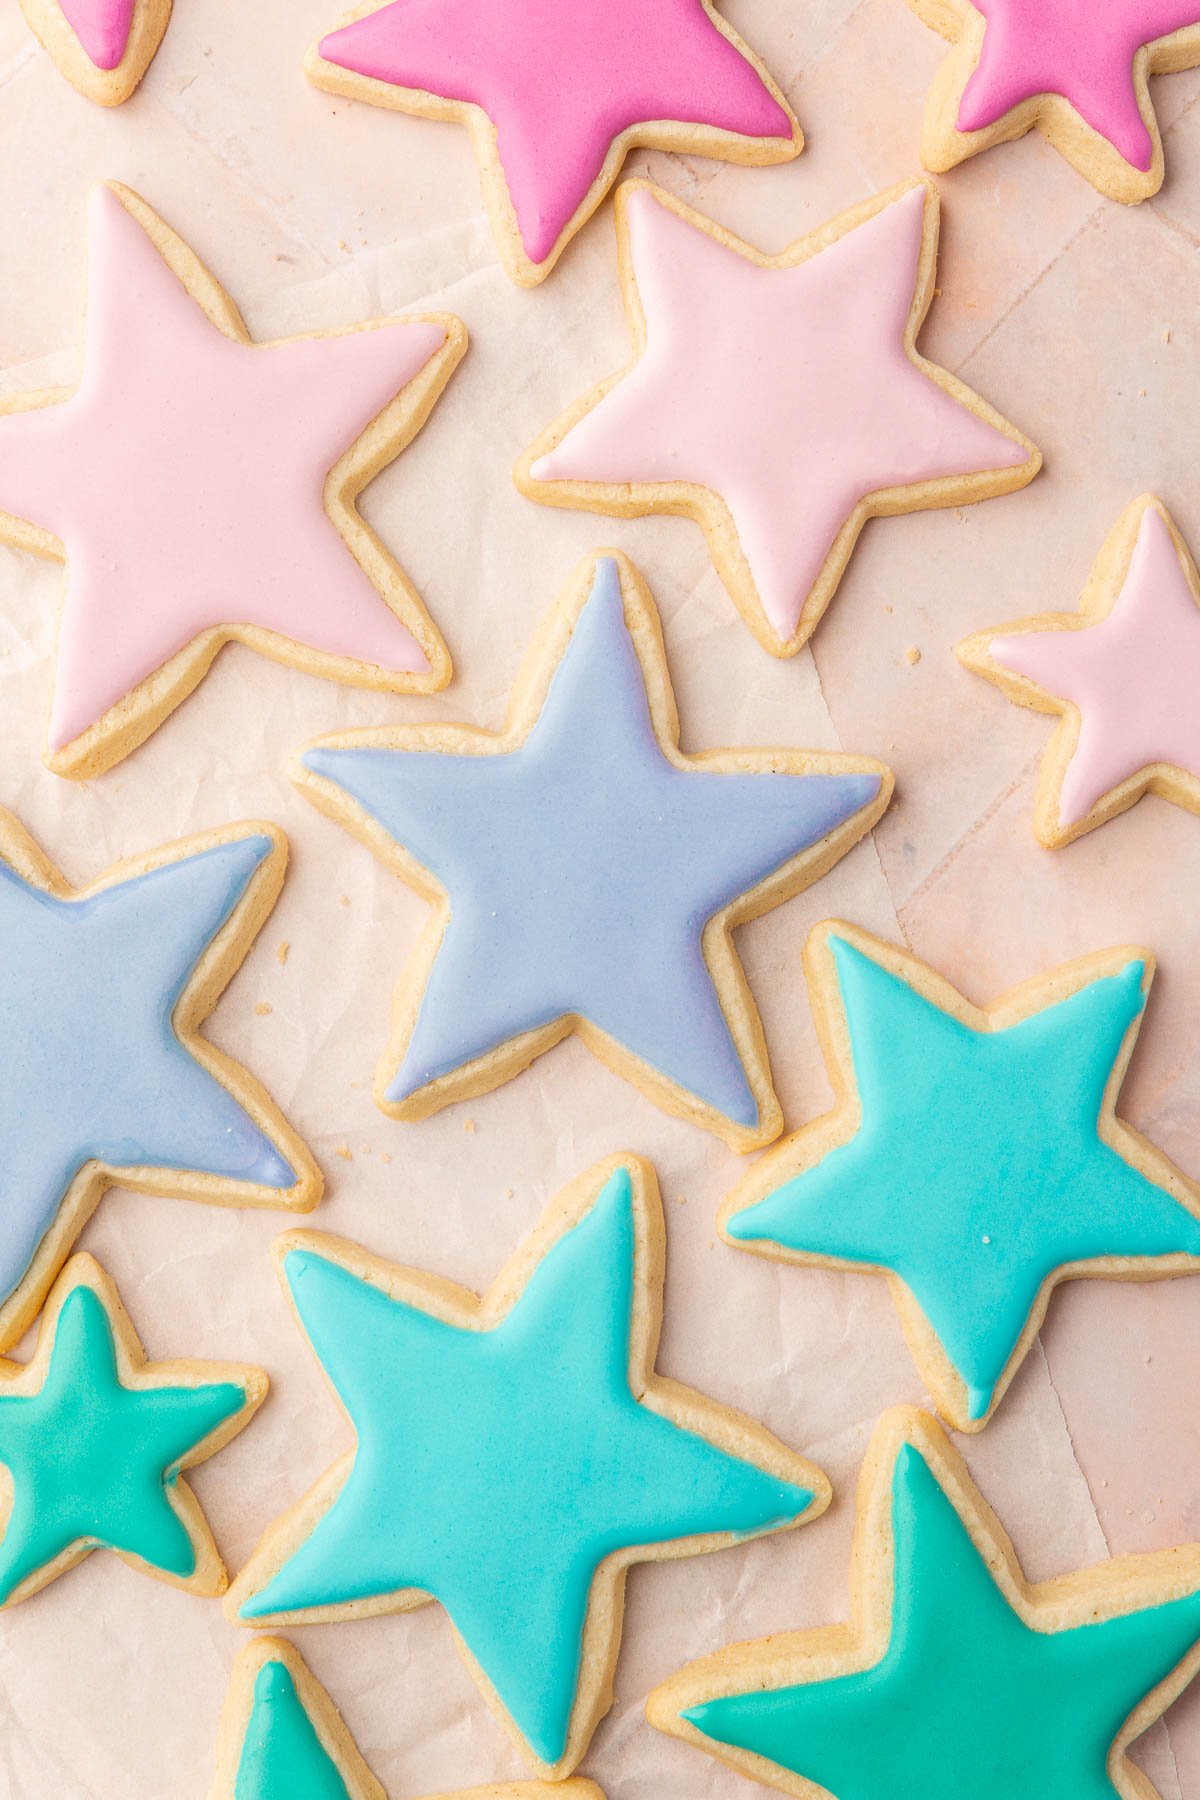 Star sugar cookies frosted with pink, purple, blue and green royal icing that has dried.